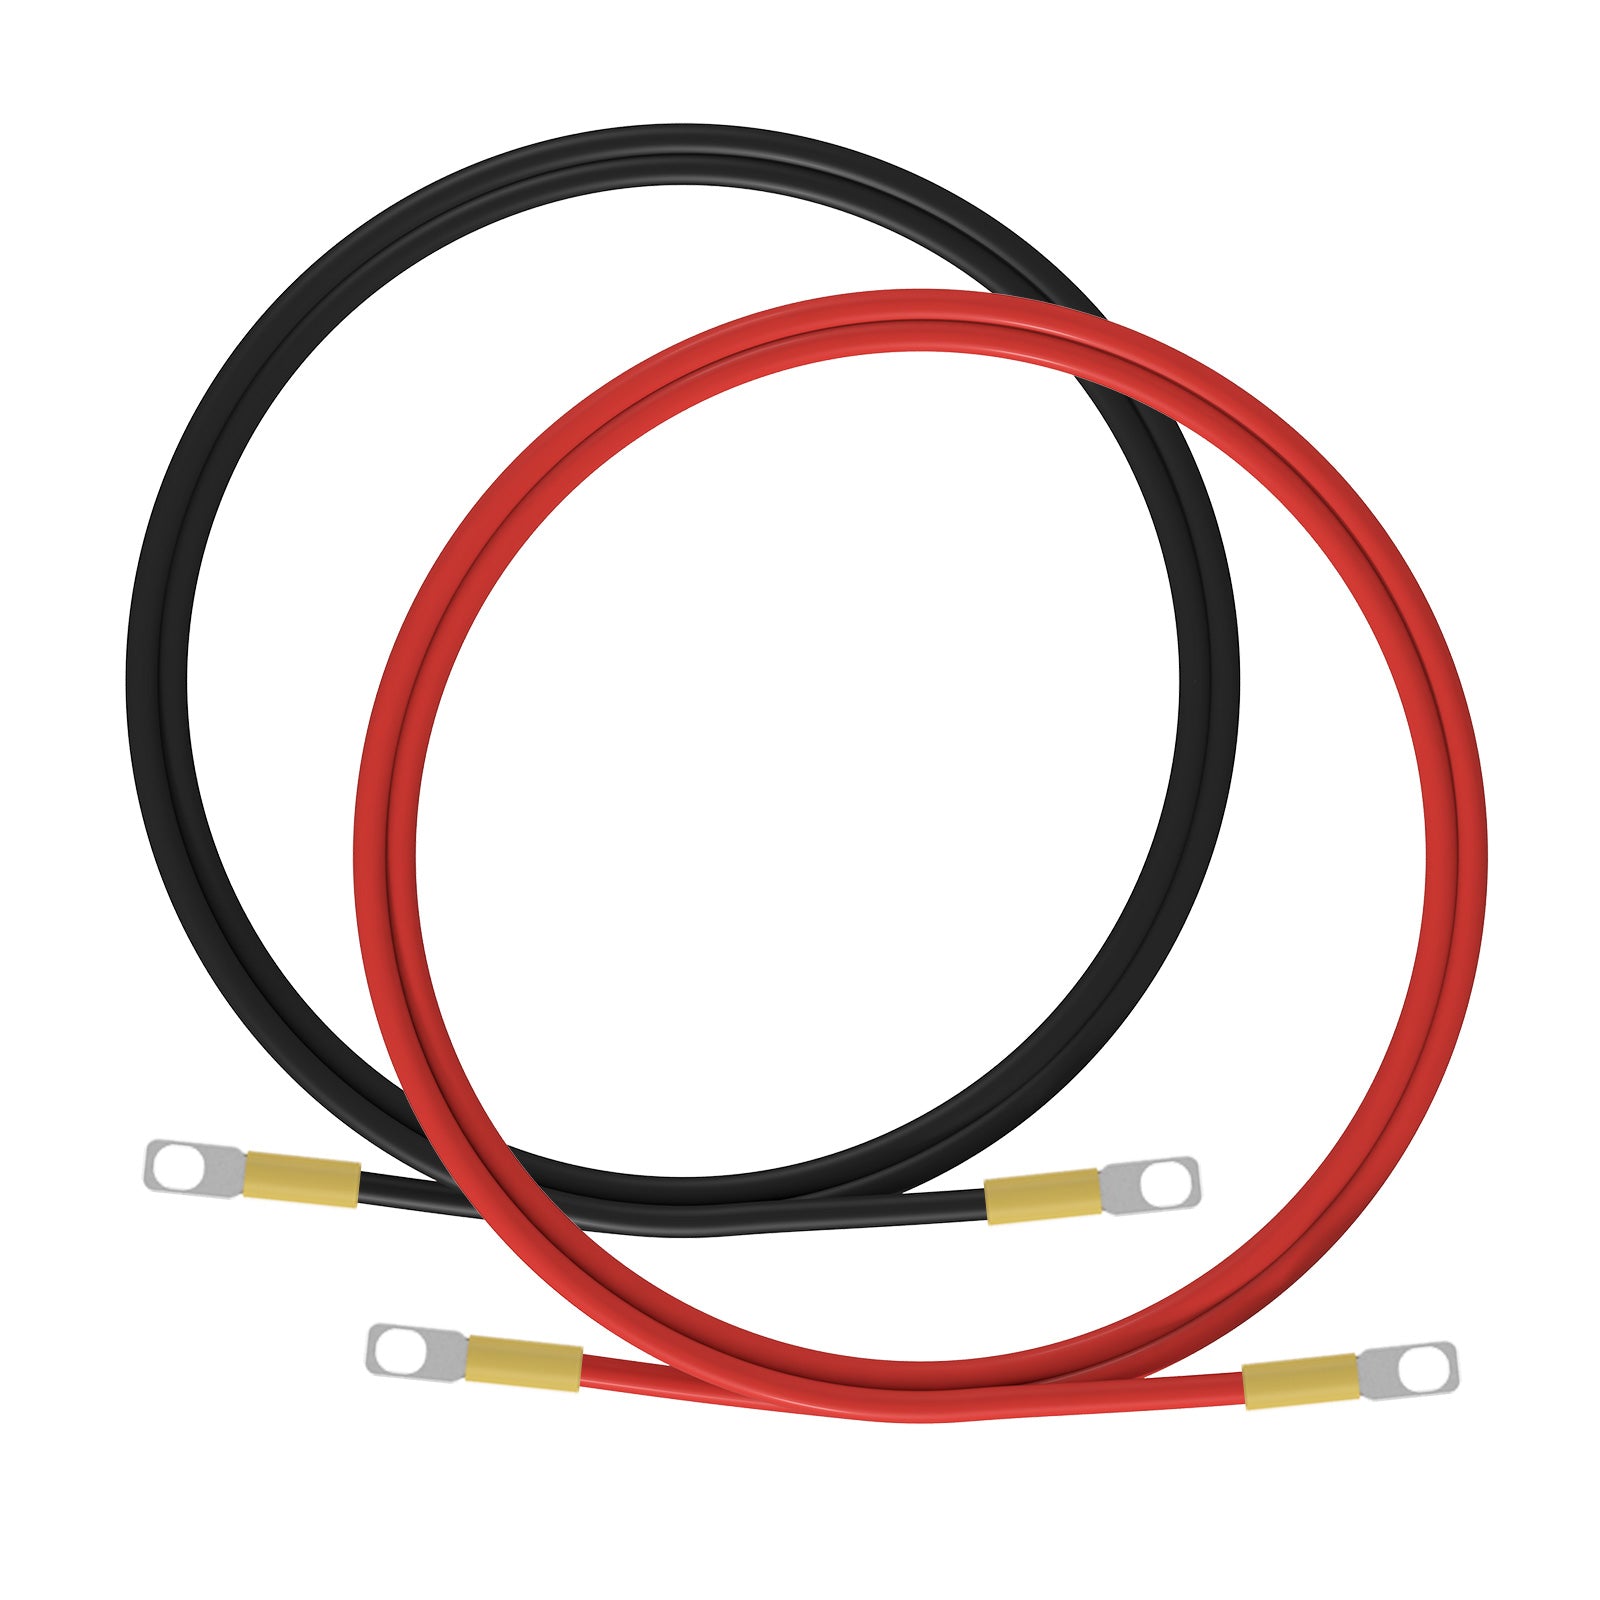 dchouse_10awg_6mm__12_inch_M5_rings_1